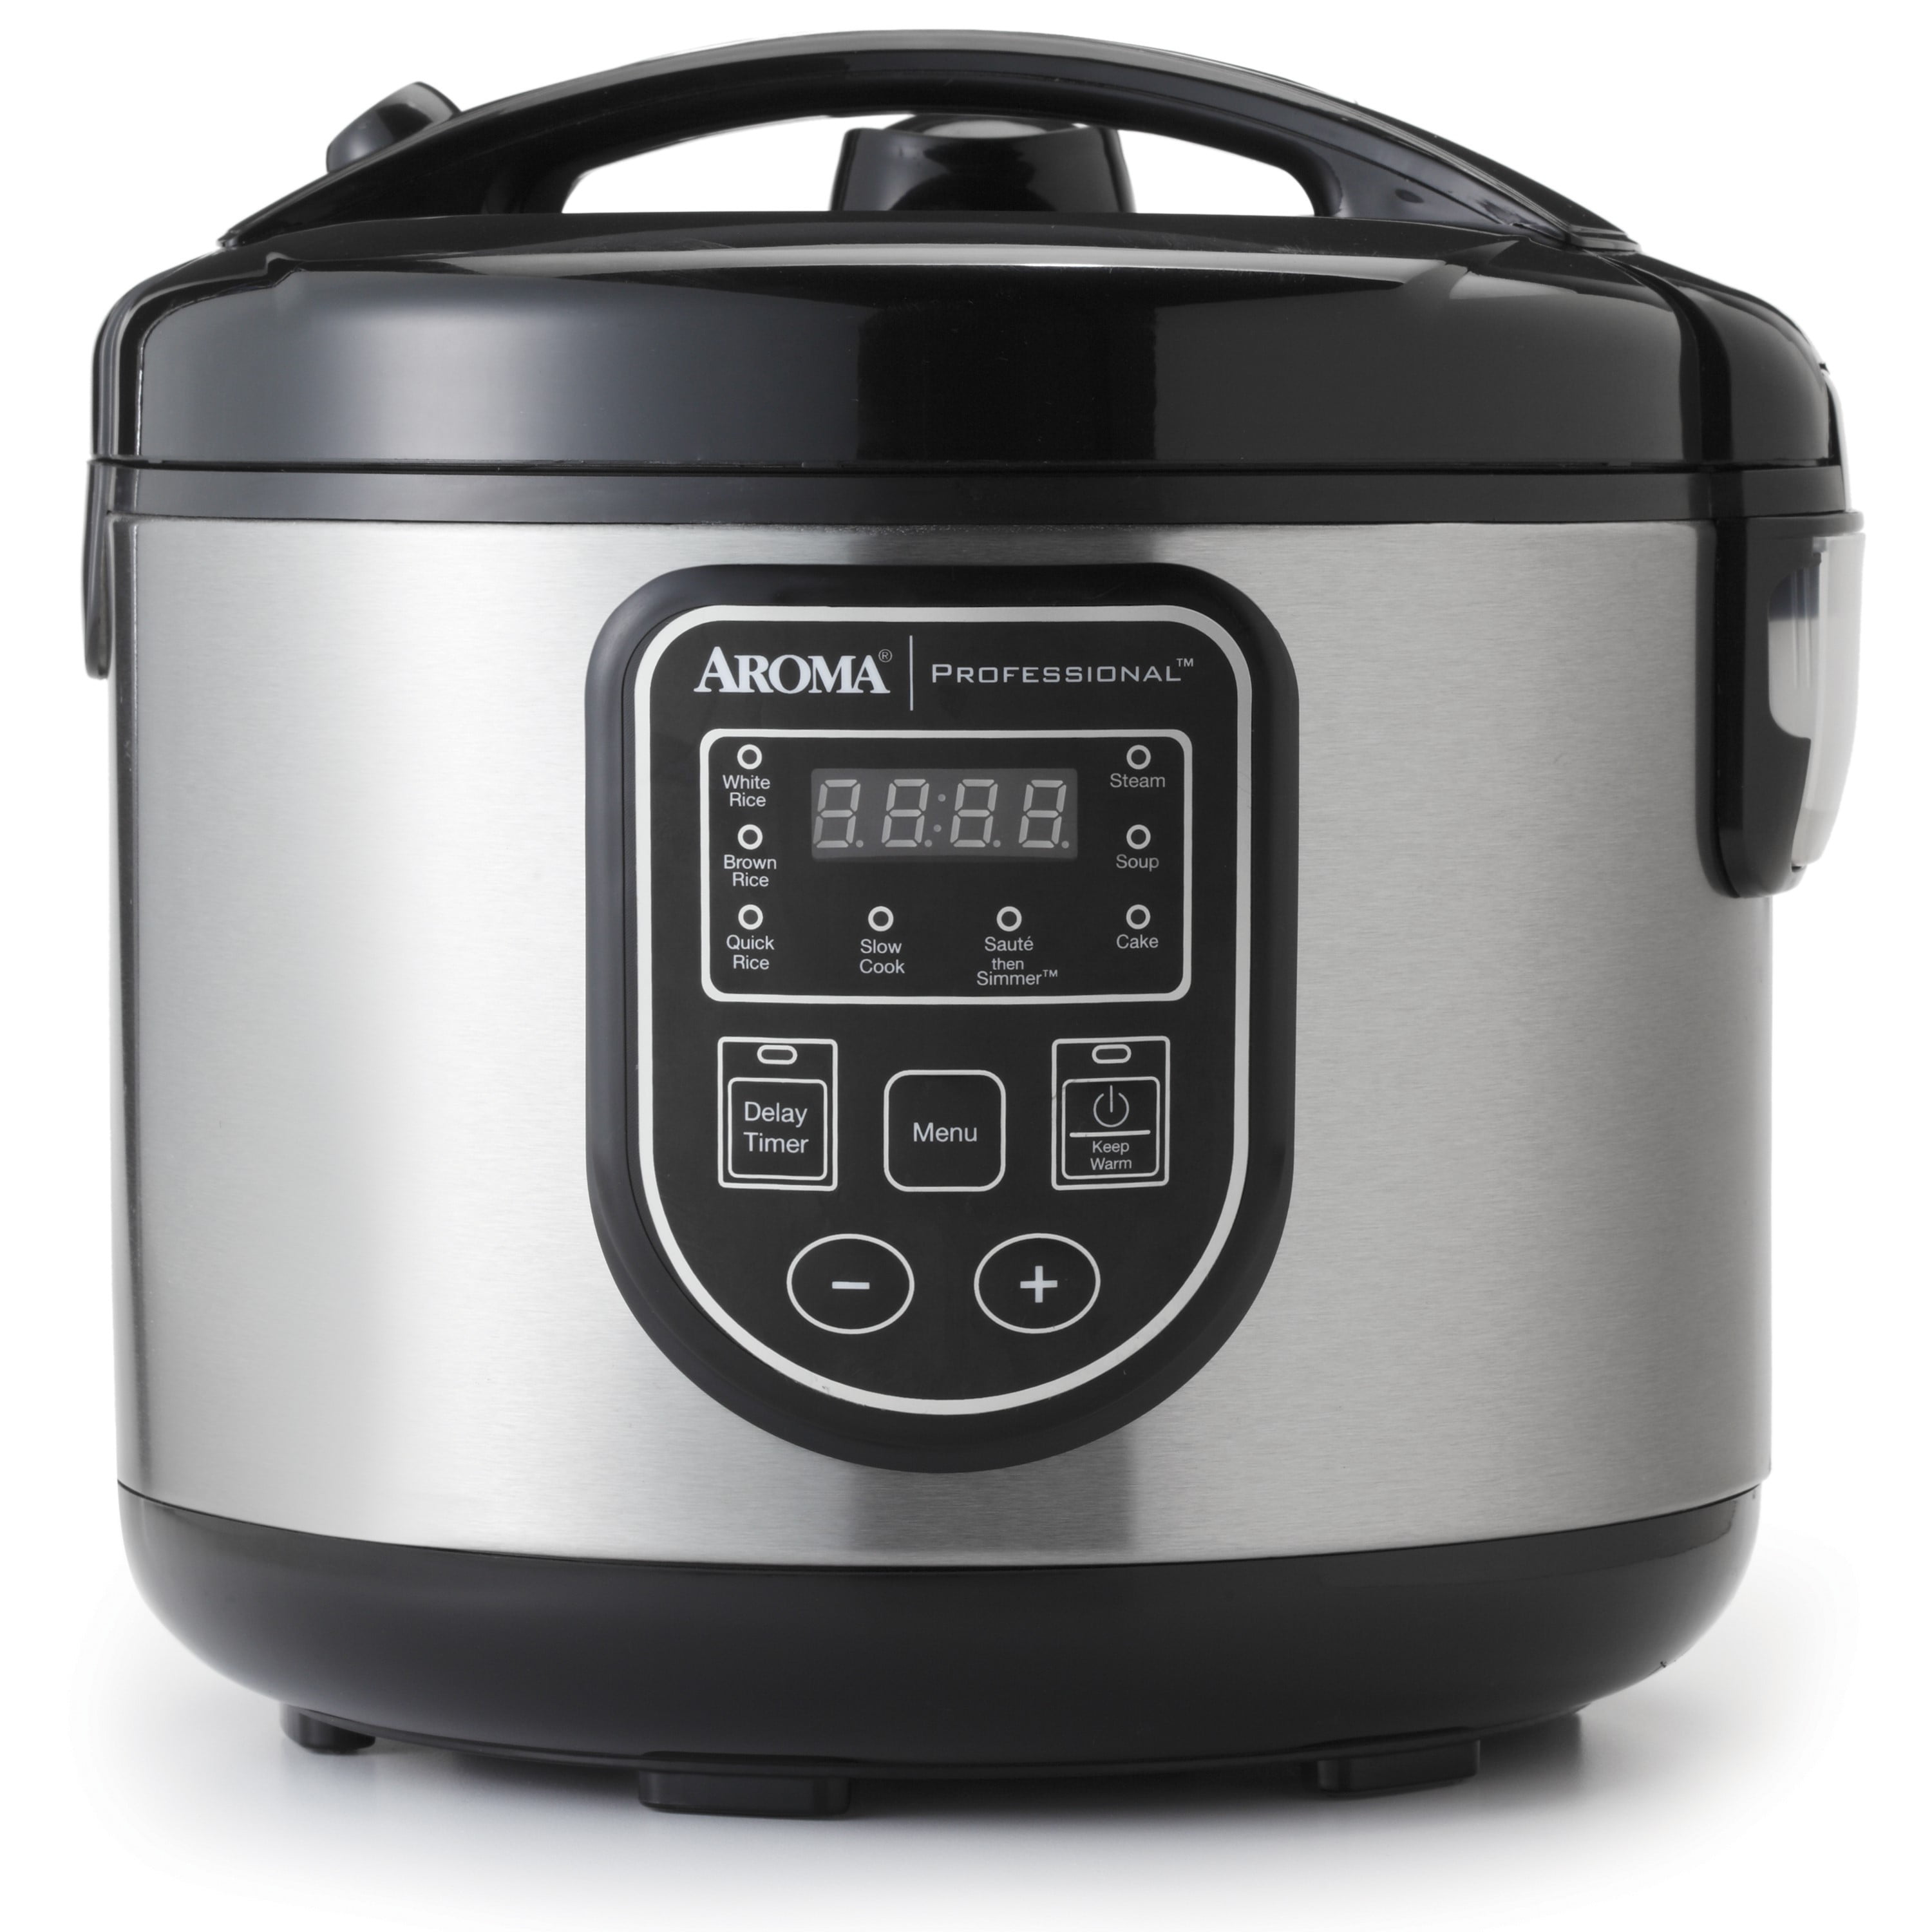 AROMA 8-Cup White Digital Rice Cooker in Black Control Panel ARC